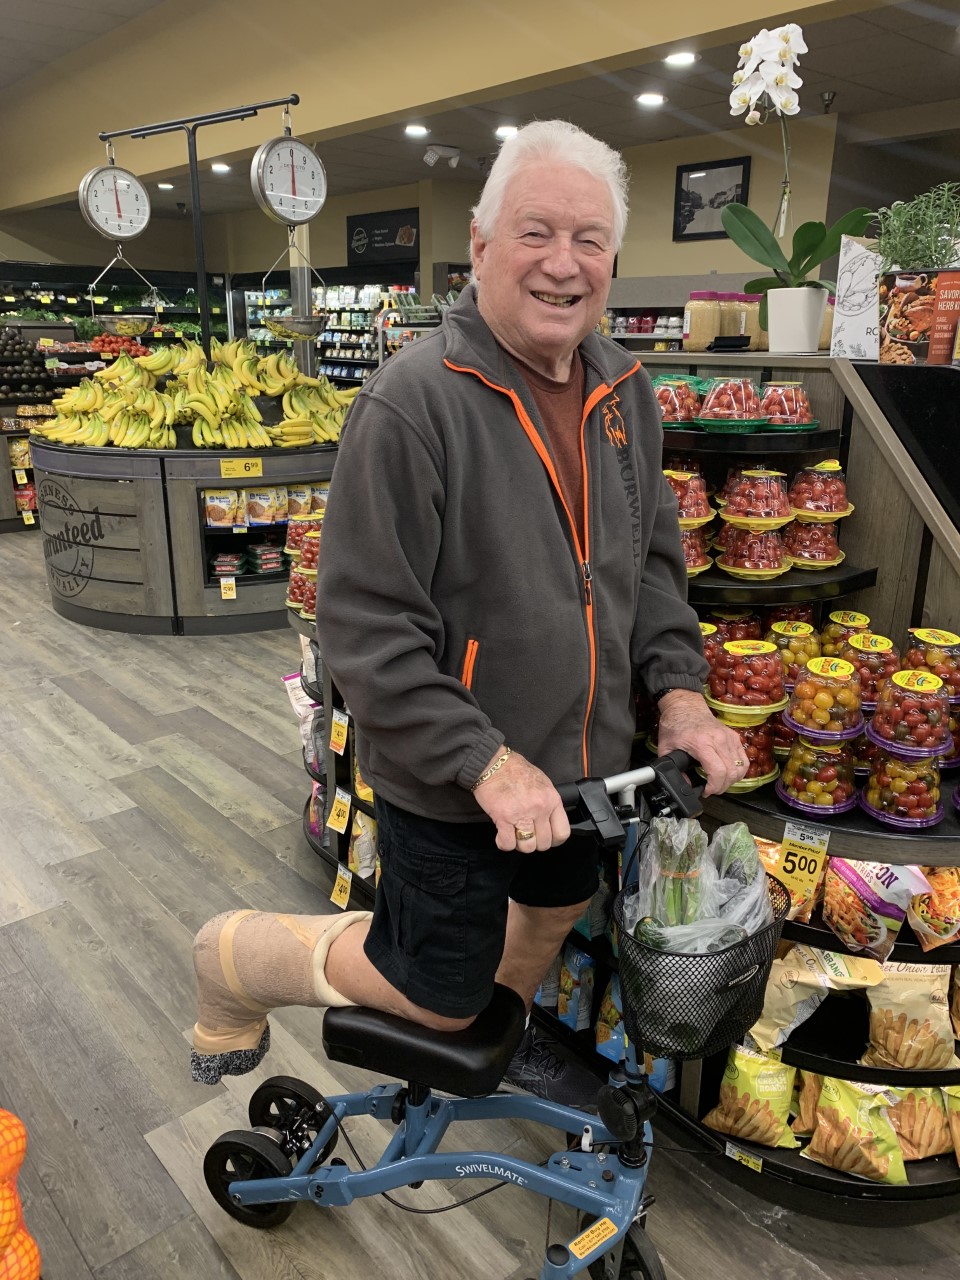 A senior with a leg injury navigates the aisles of a bustling supermarket on a knee scooter. He wears a determined expression as he carefully selects fresh produce from the shelves. His knee scooter, a mobility aid with handlebars and wheels, allows him to move around comfortably while keeping weight off his injured leg. Brightly colored fruits and vegetables surround him, offering a vibrant and nutritious array of options. The scene captures his independence and resilience in adapting to his circumstances during the shopping trip.